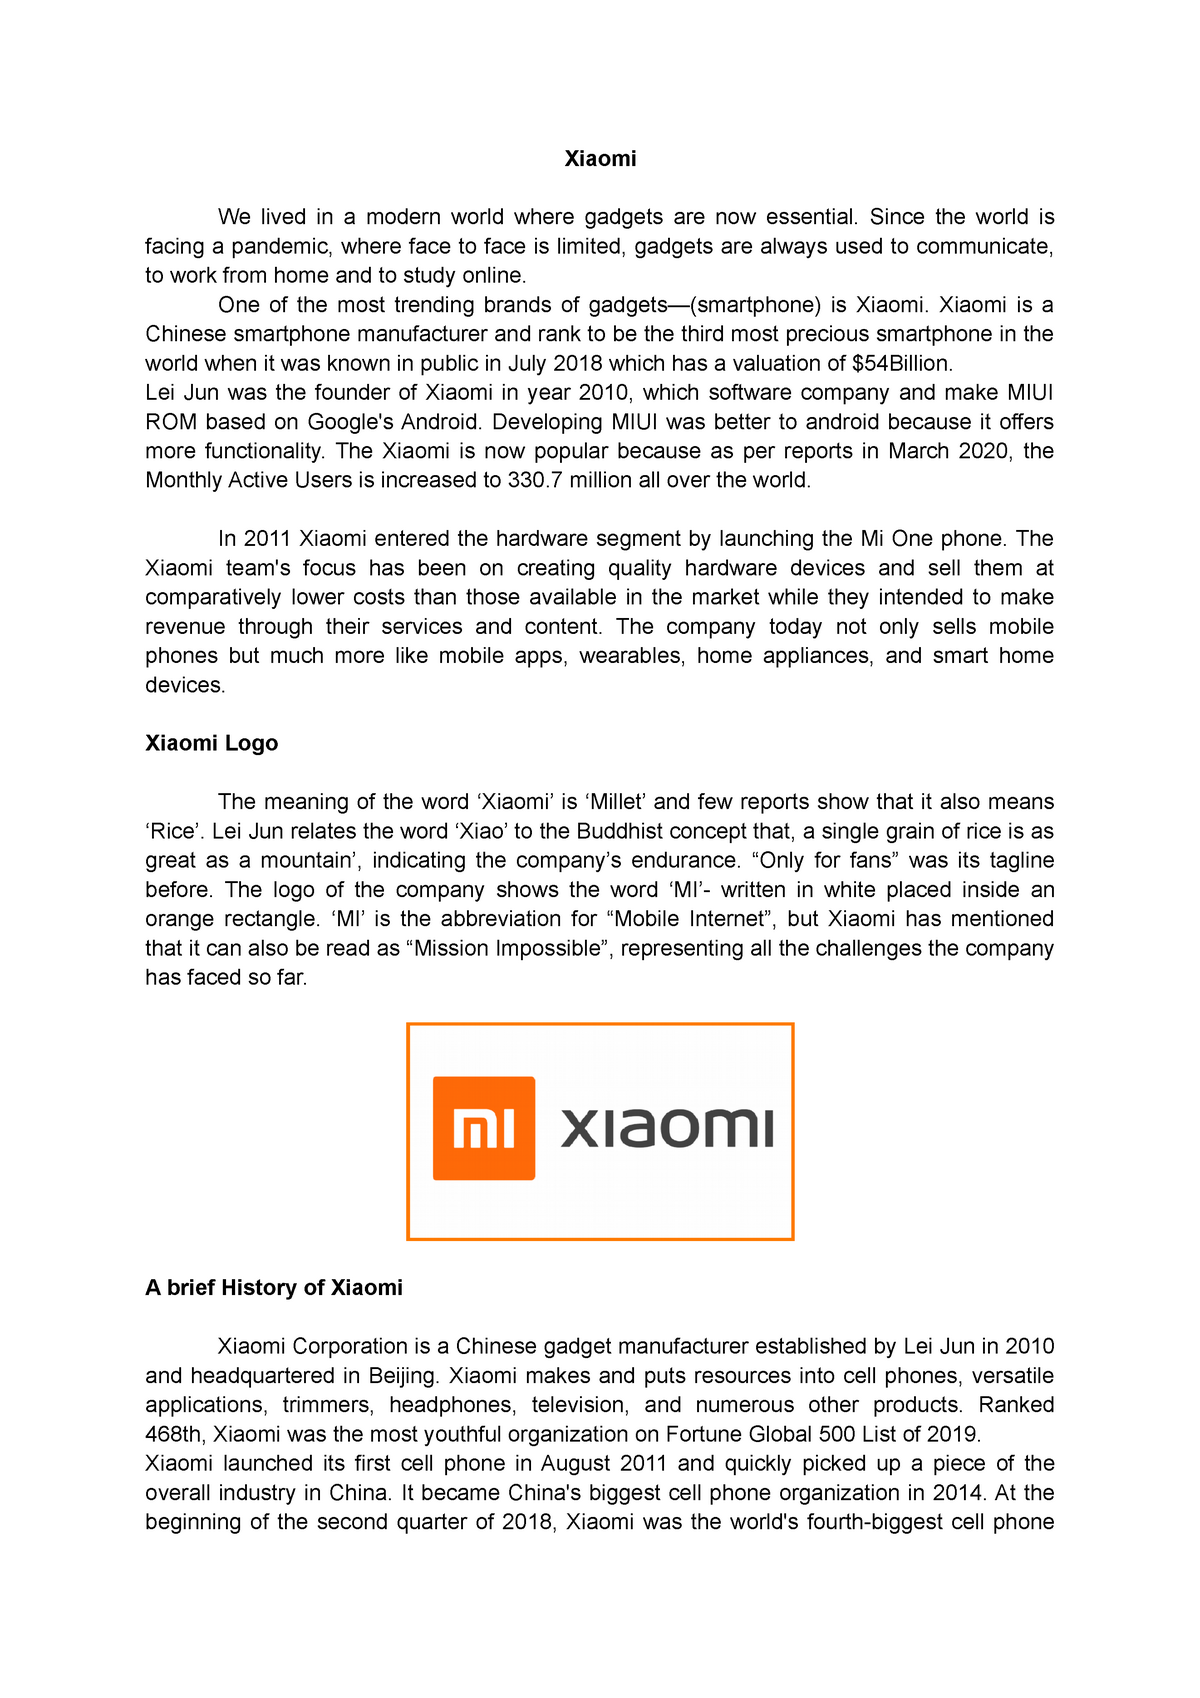 research paper on xiaomi